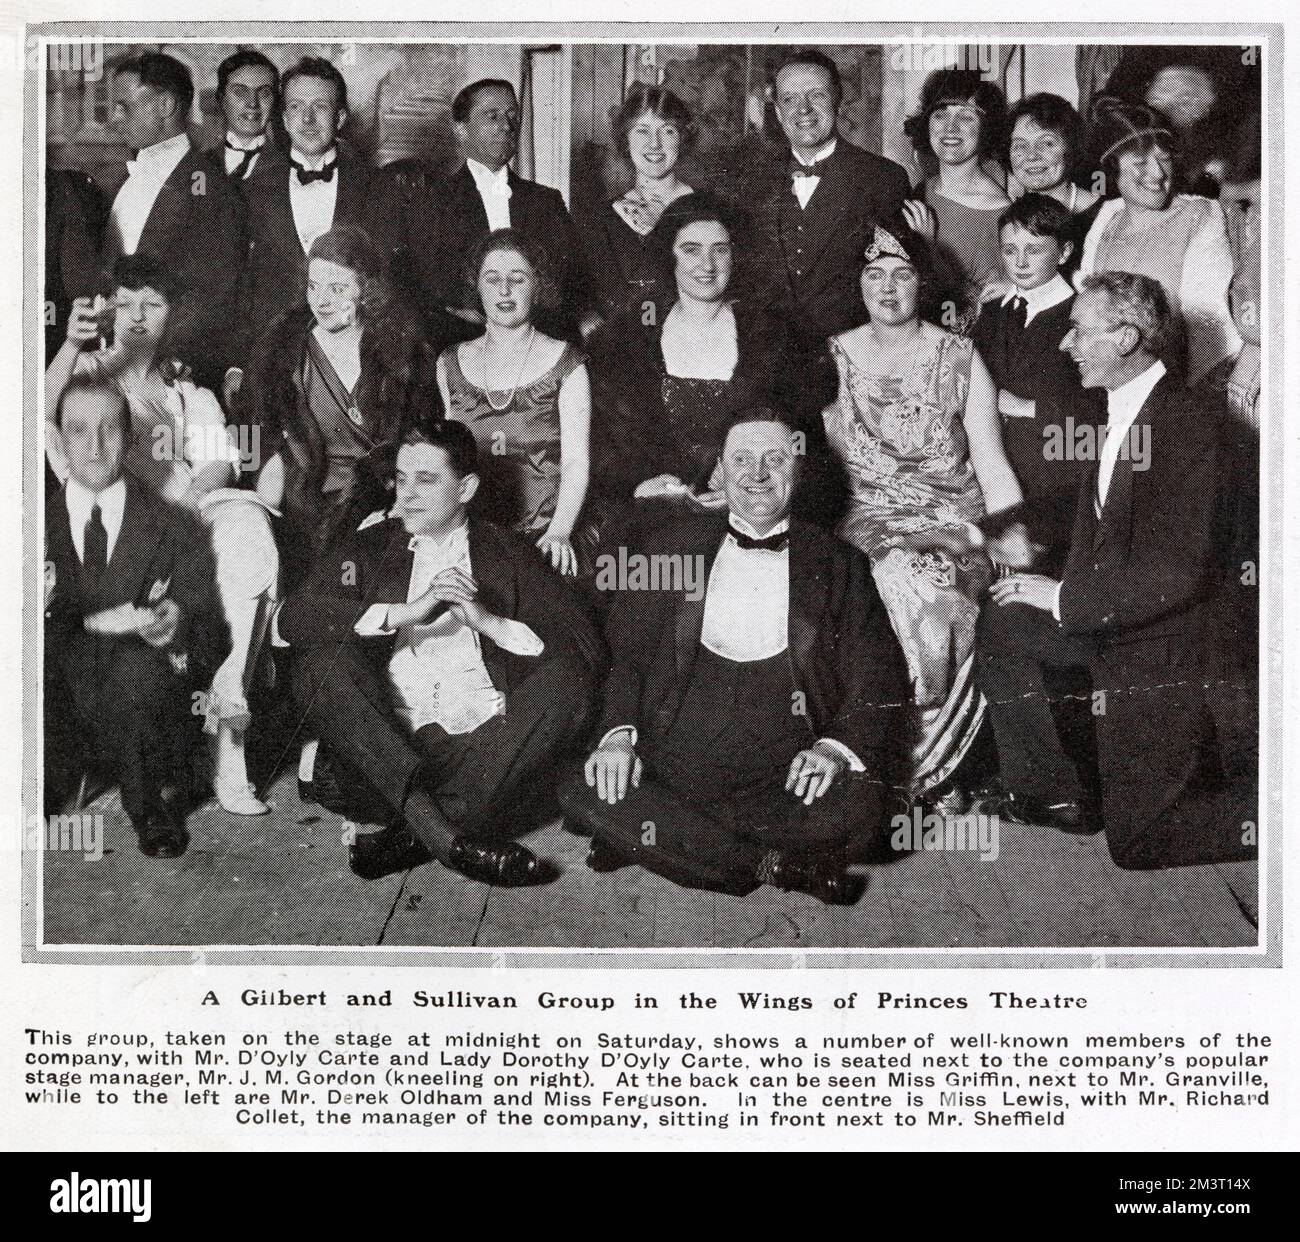 Well-known members of the D'Oyly Carte Company on the stage at Princes Theatre including Lady Dorothy D'Oyly Carte with the company's stage manager, Mr. J.M. Gordon (kneeling right) . Stock Photo